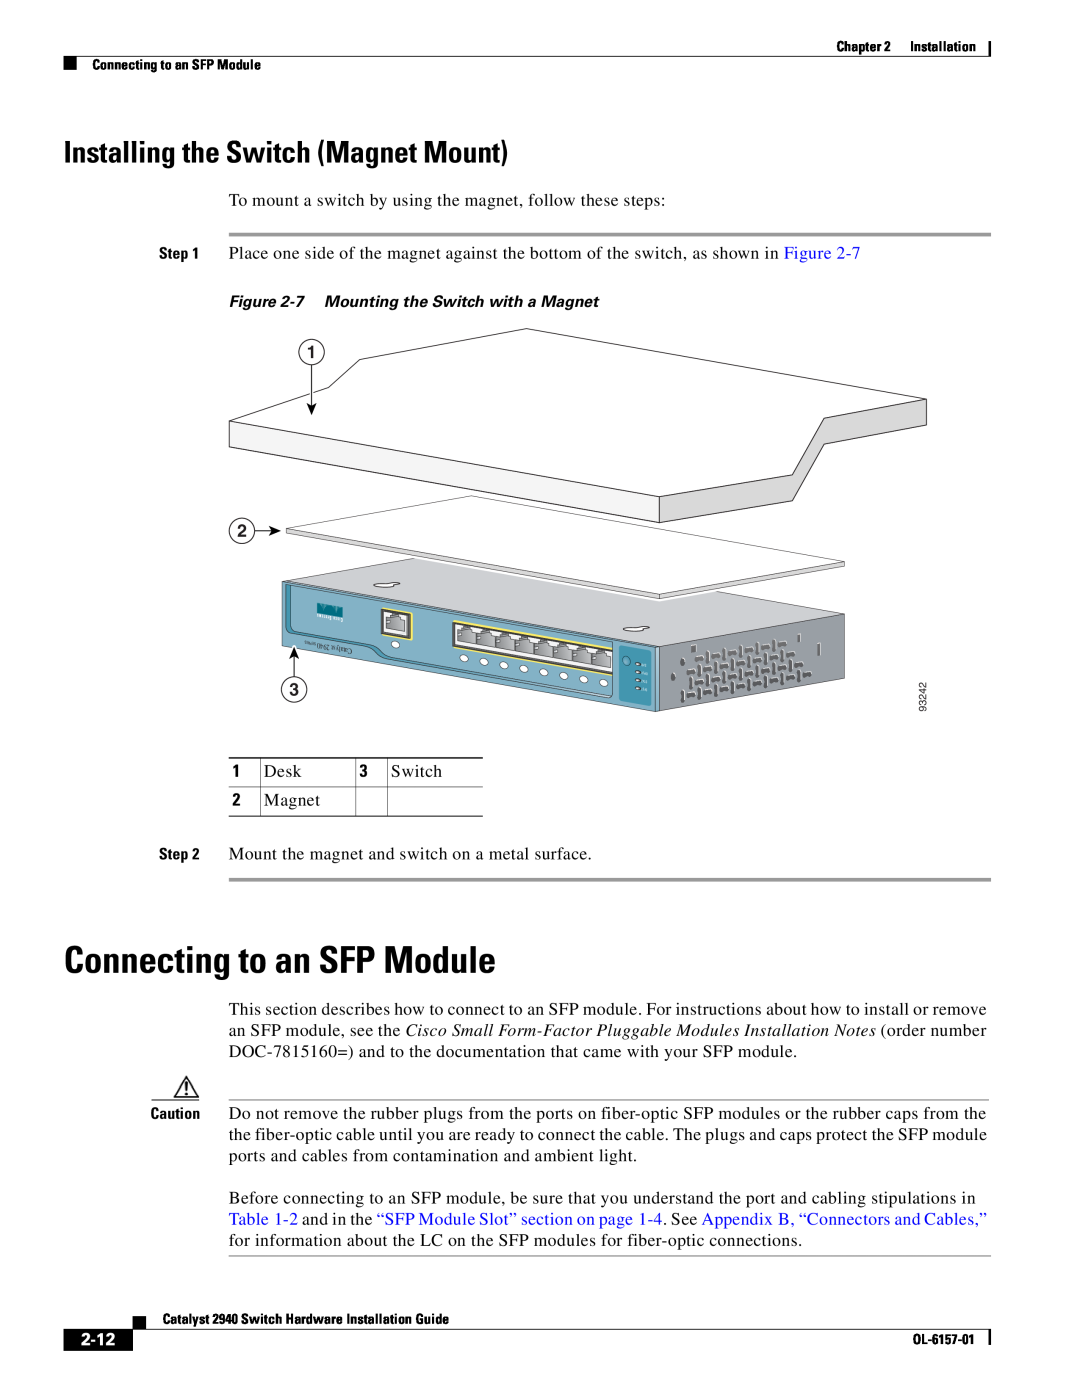 Cisco Systems OL-6157-01 manual Connecting to an SFP Module, Installing the Switch Magnet Mount, 2-12 